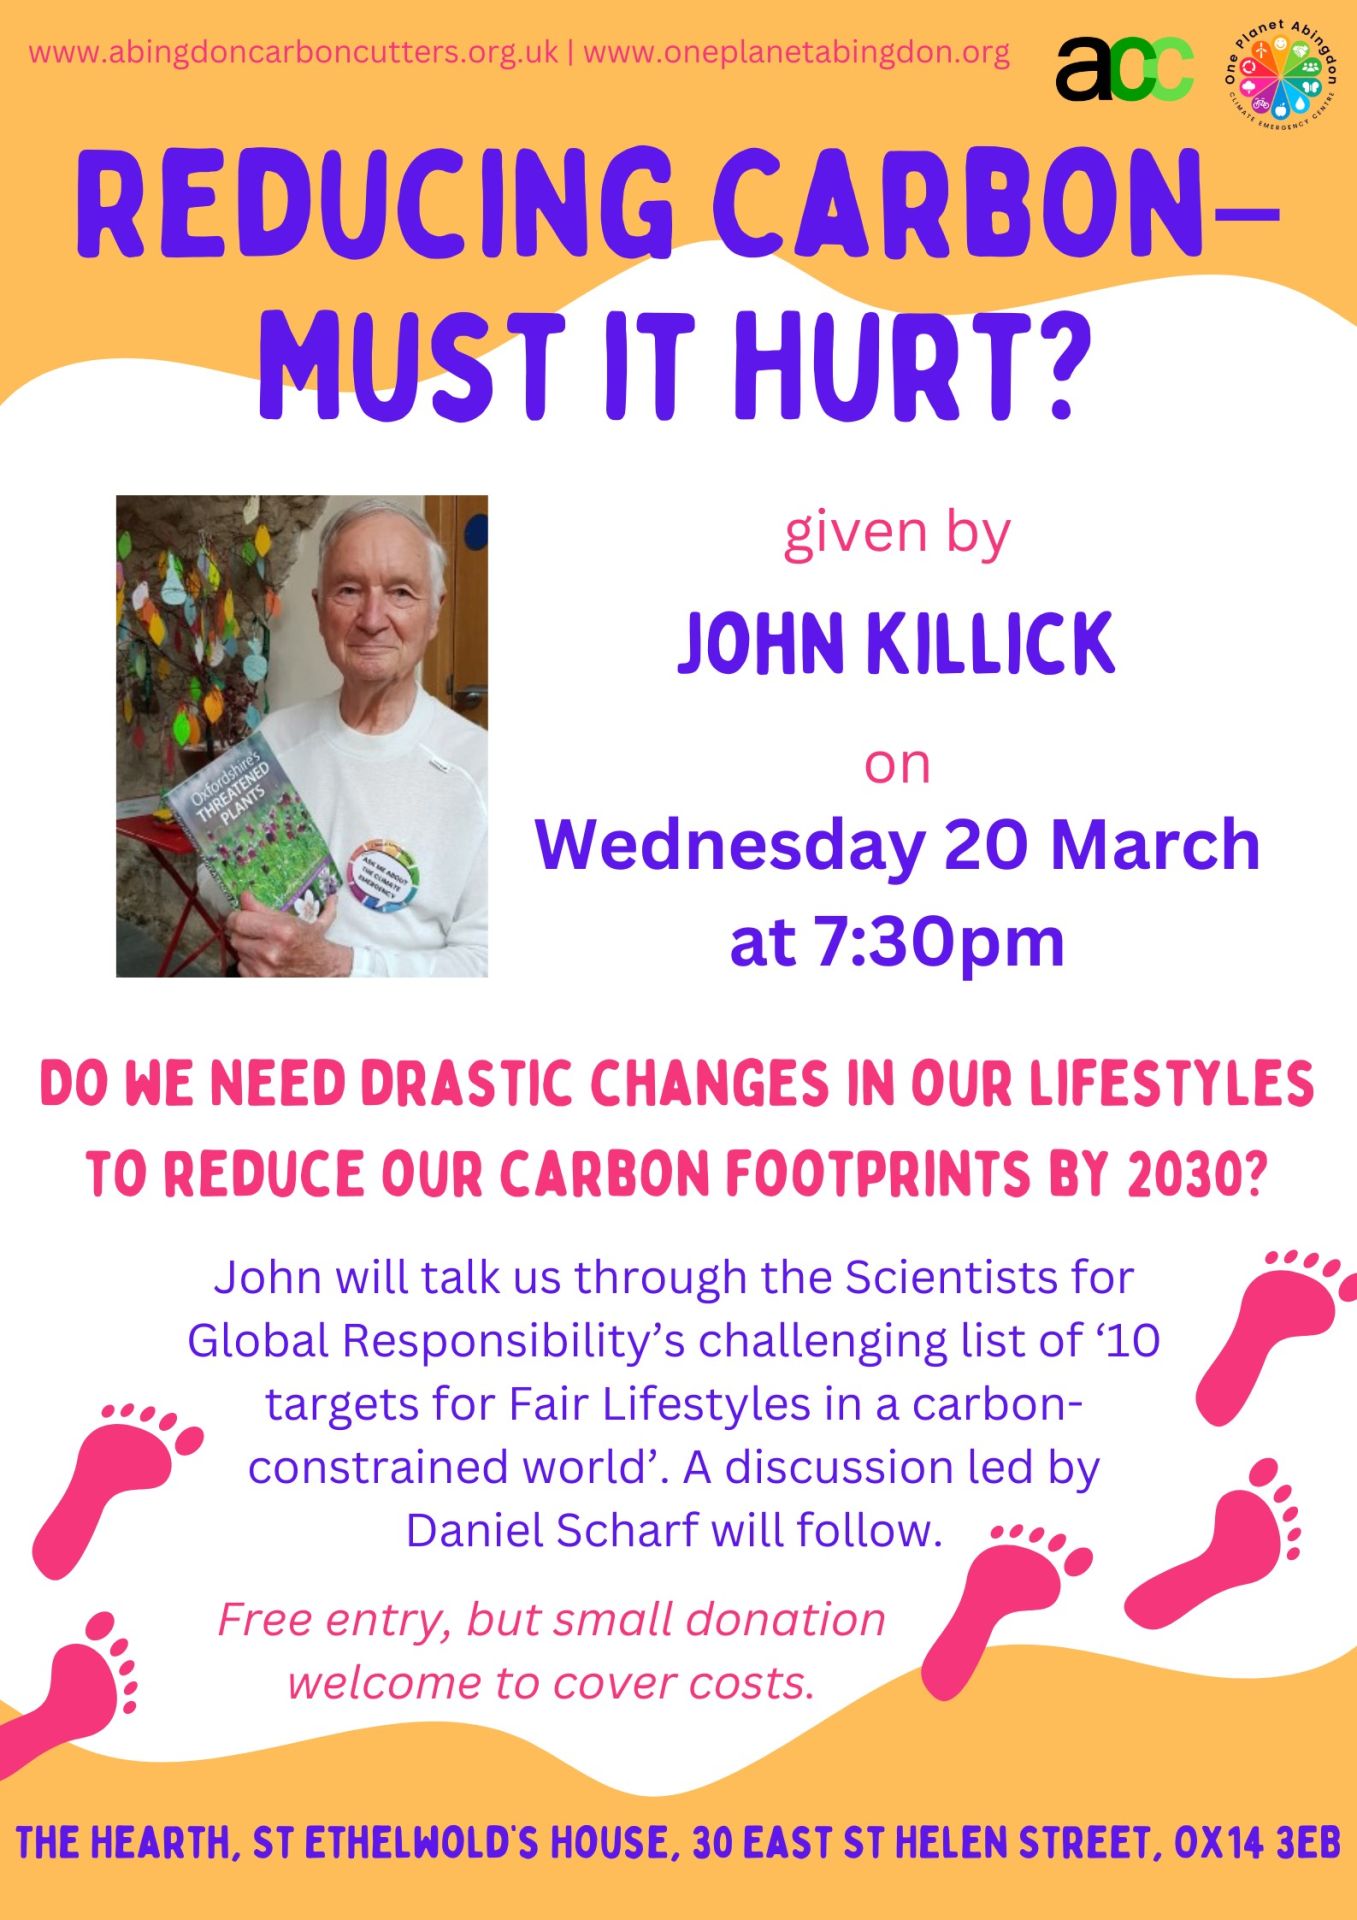 Reducing Carbon - Must It Hurt? @ St Ethelwold's House